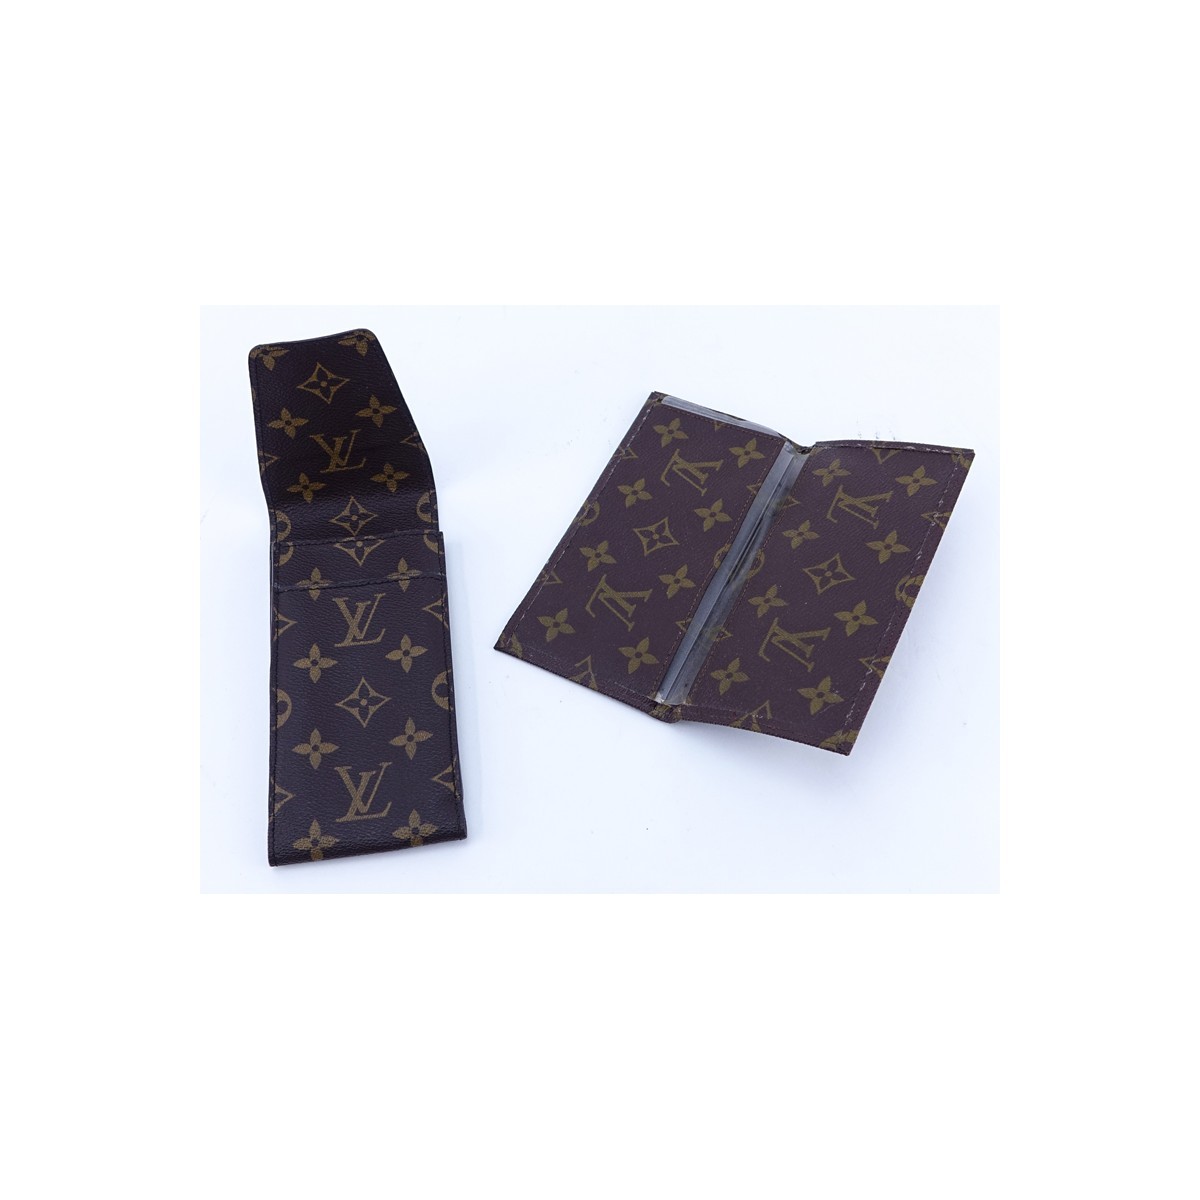 Two (2) Louis Vuitton Brown Monogram Coated Canvas Accessories. Includes checkbook holder and eyeglass case.